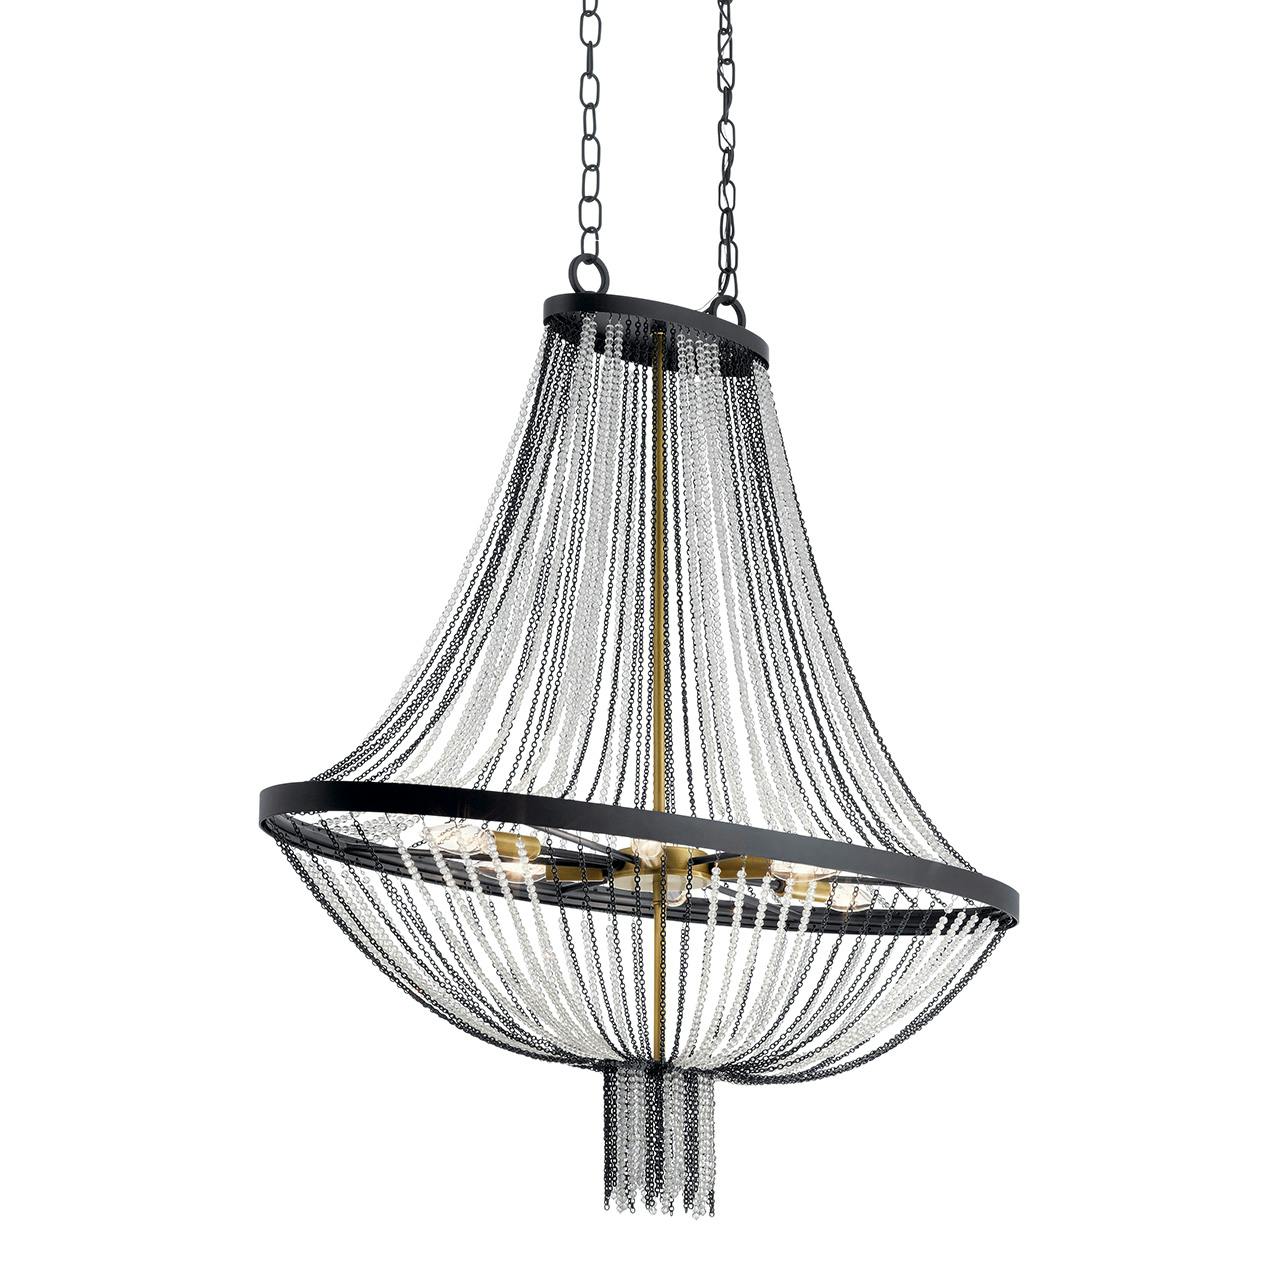 Alexia 5 Light Foyer Chandelier Black without the canopy on a white background